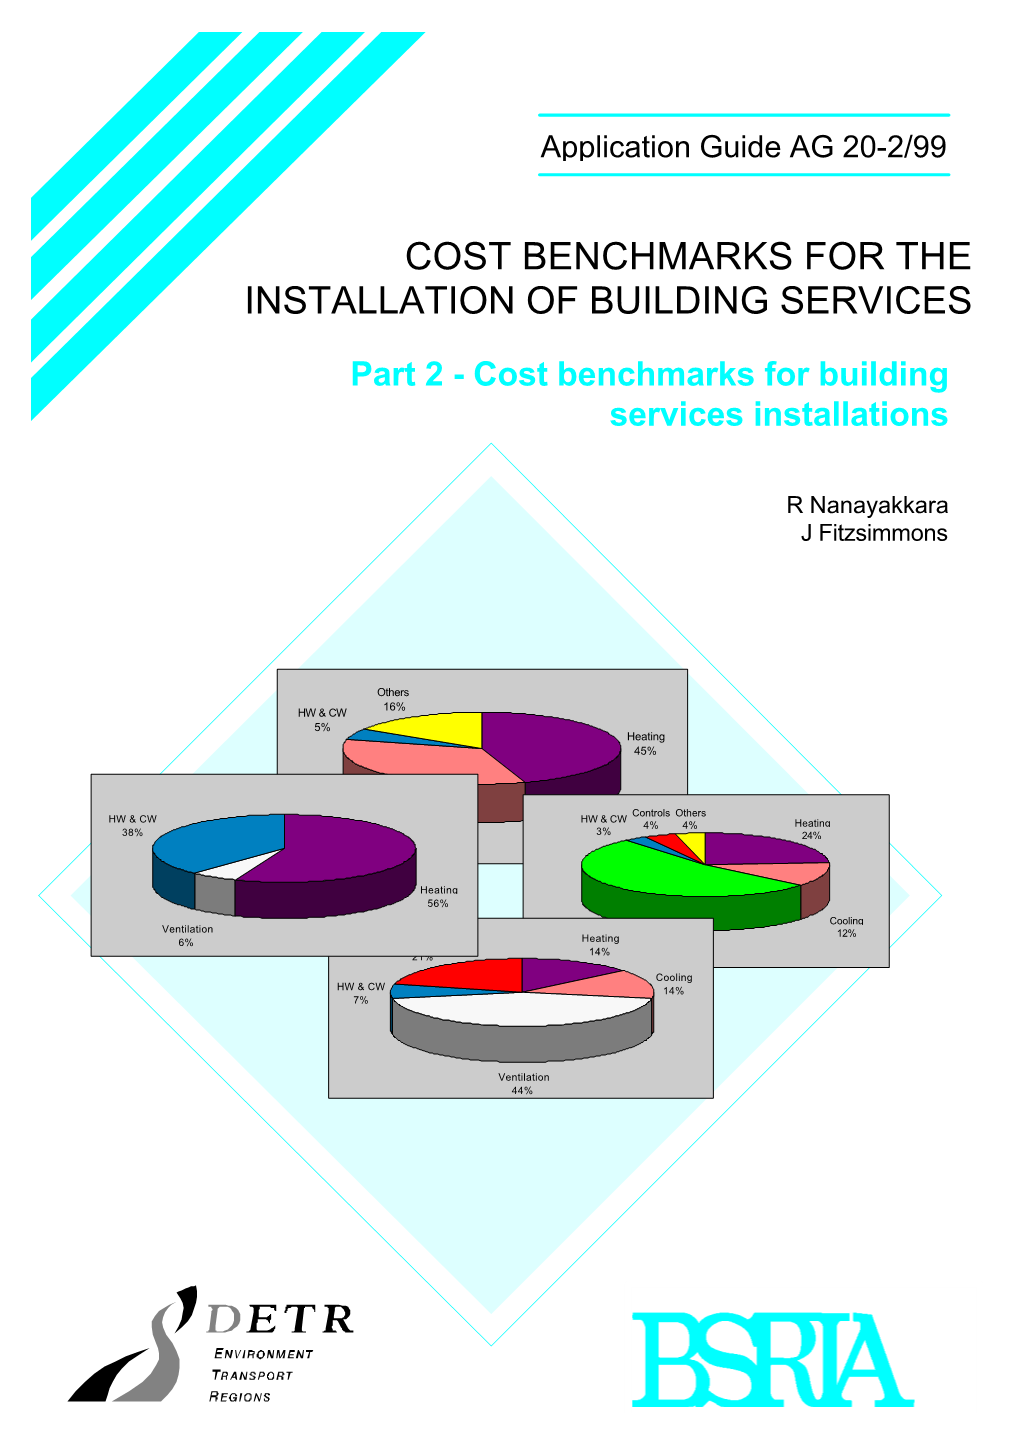 Cost Benchmarks for the Installation of Building Services